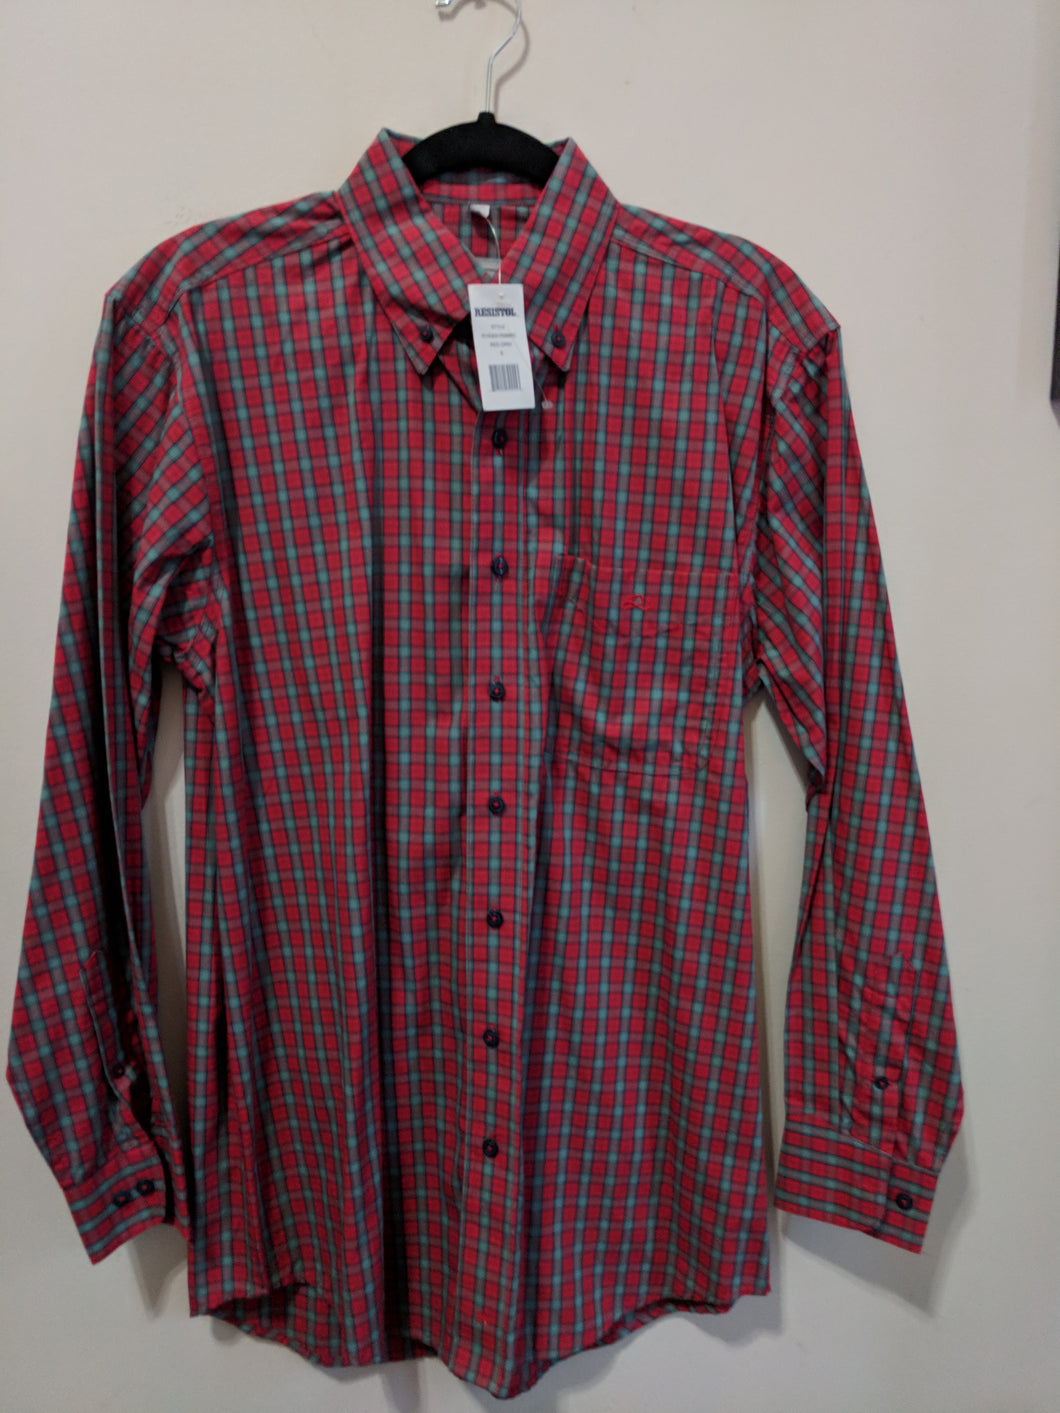 Sale Resistol Red Grid Men's shirt size Small New